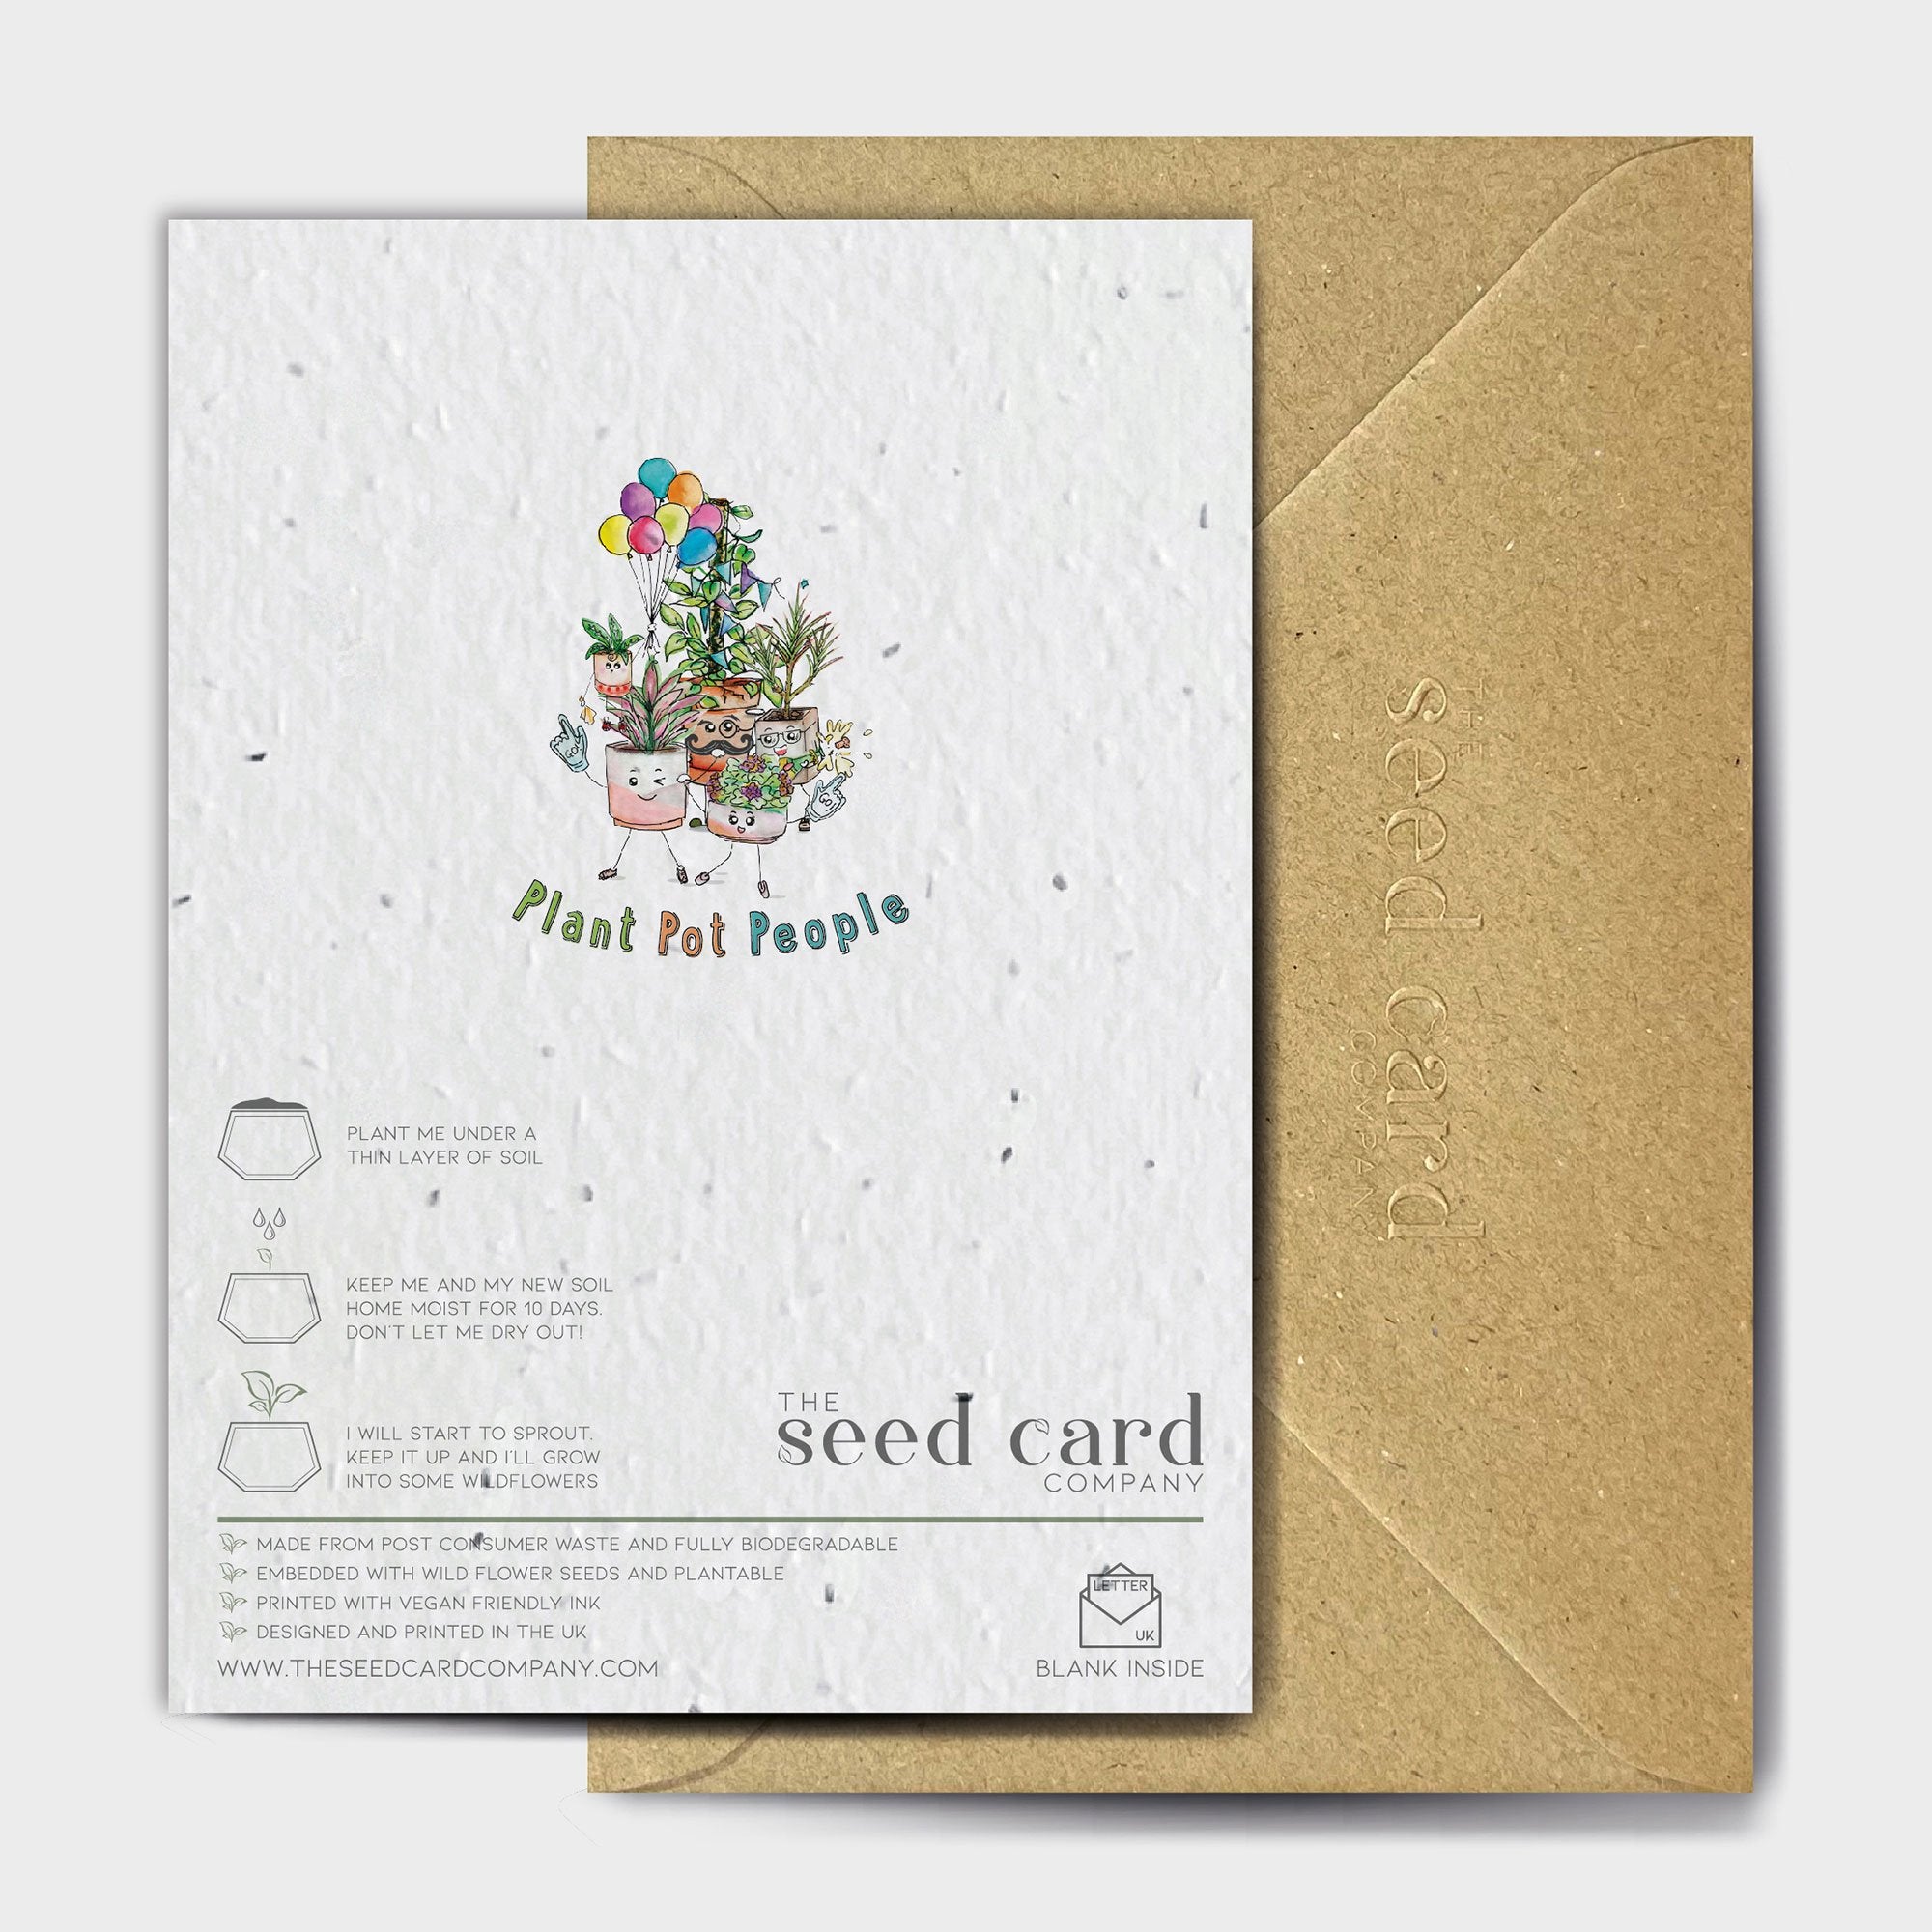 Shop online Growing Together - 100% biodegradable seed-embedded cards Shop -The Seed Card Company